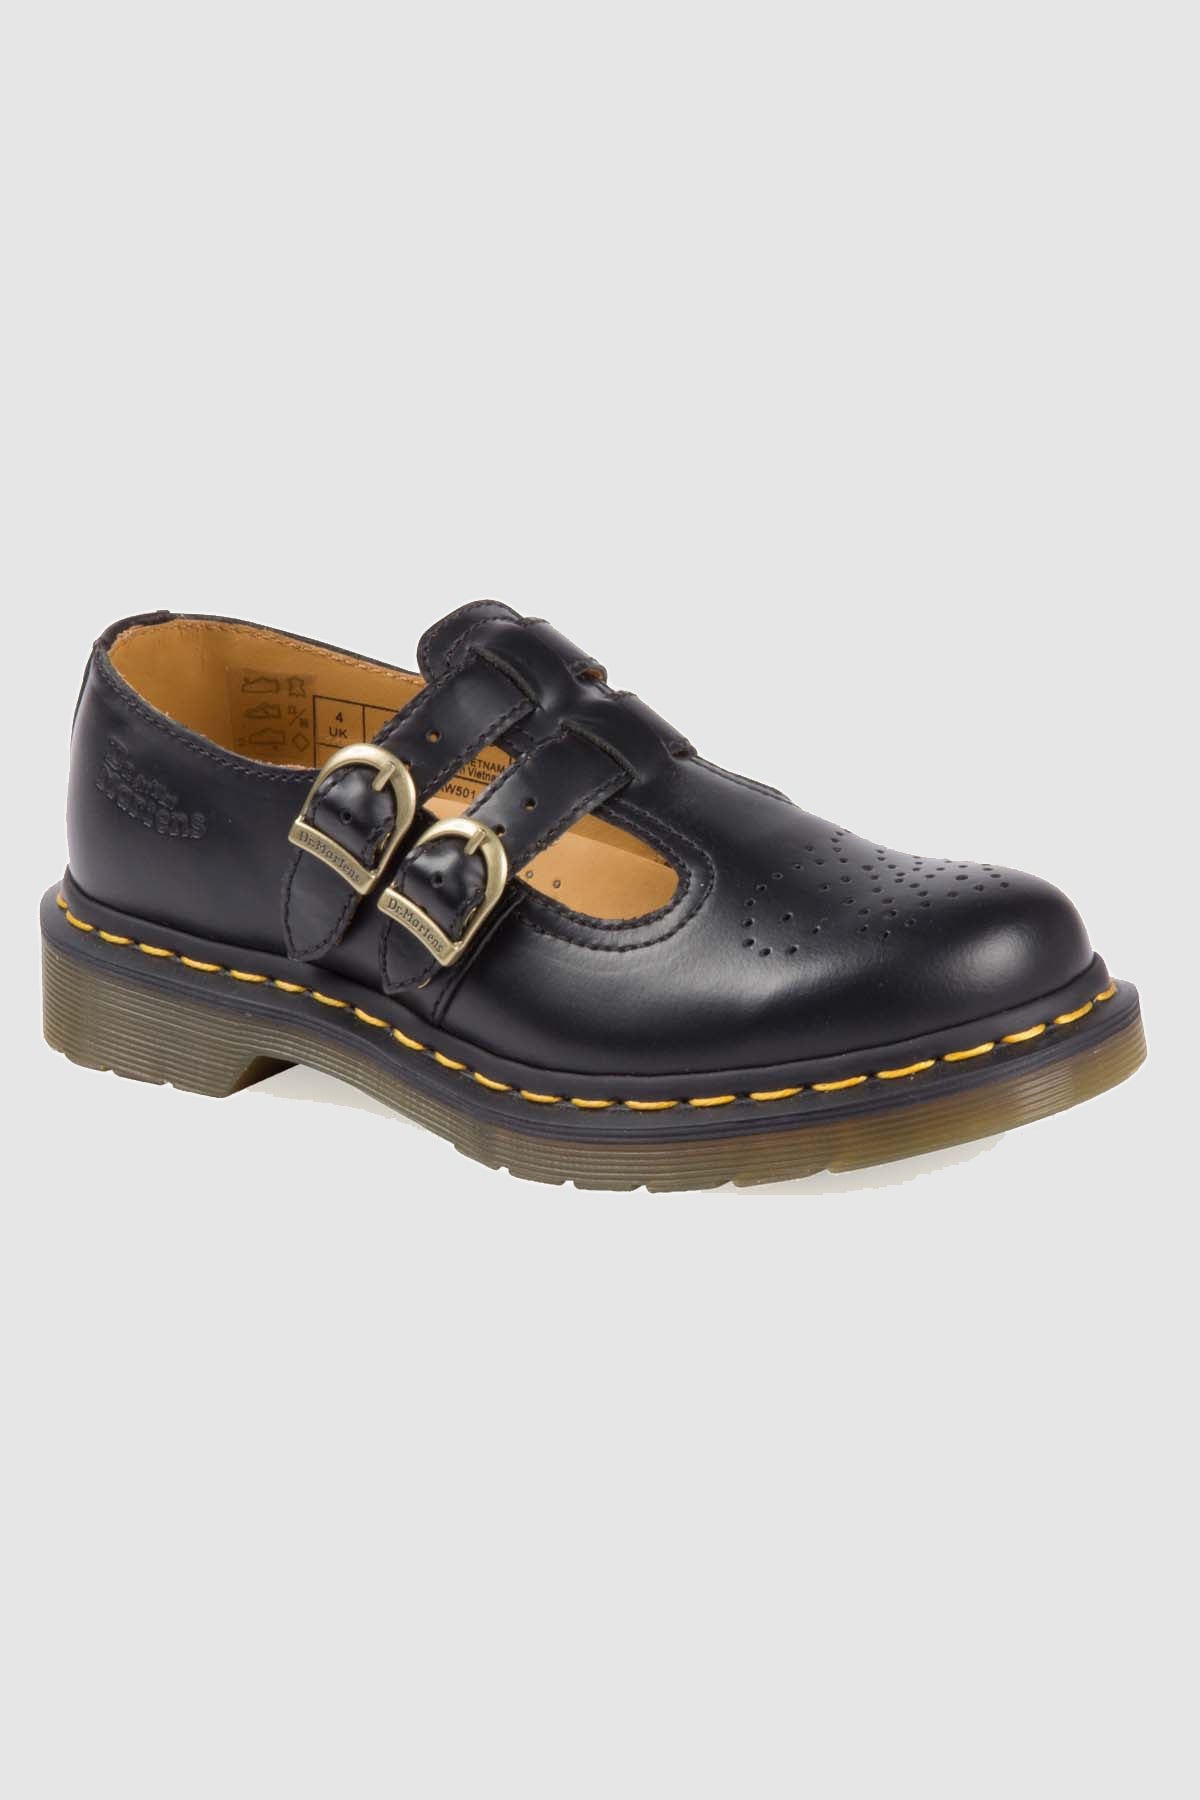 Dr Martens Womens 8065 Mary Jane Black Smooth